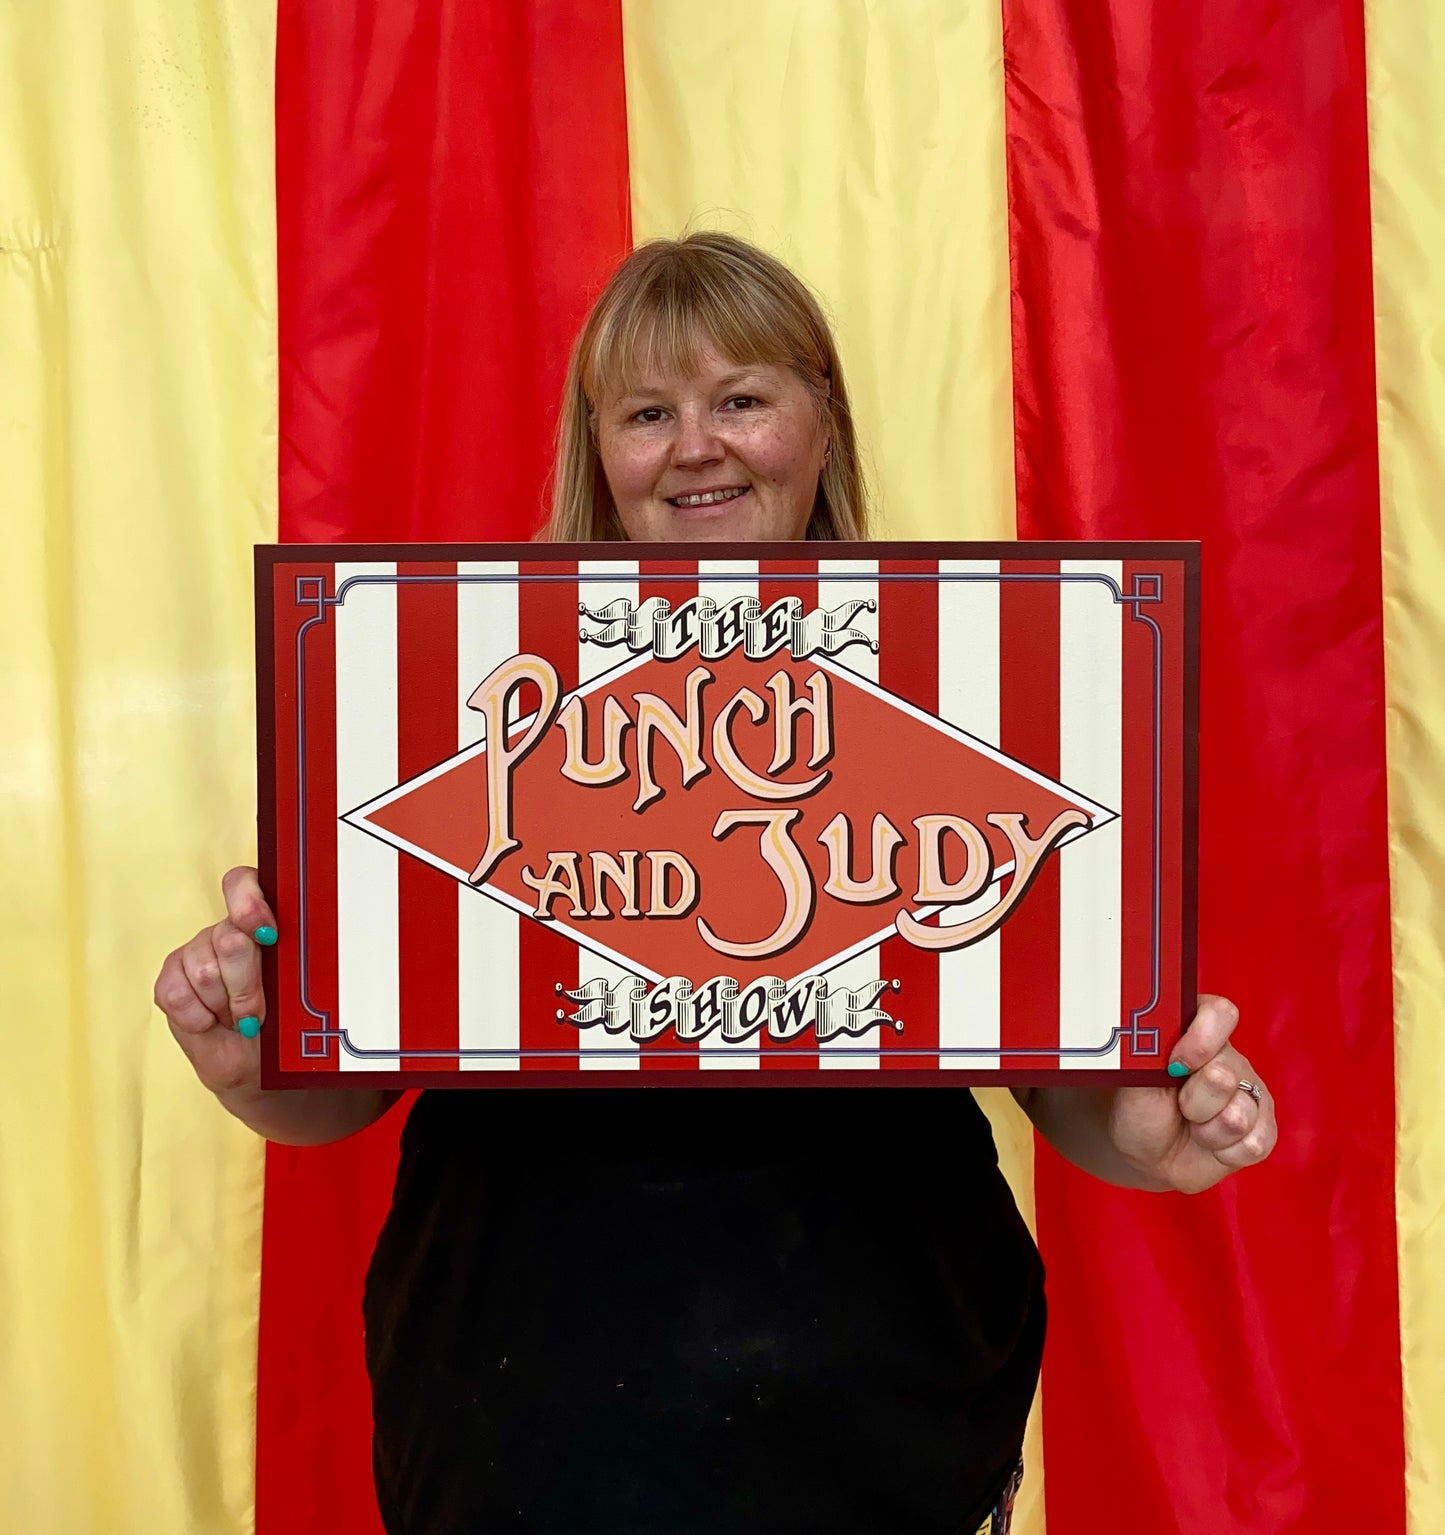 Punch & Judy Sign